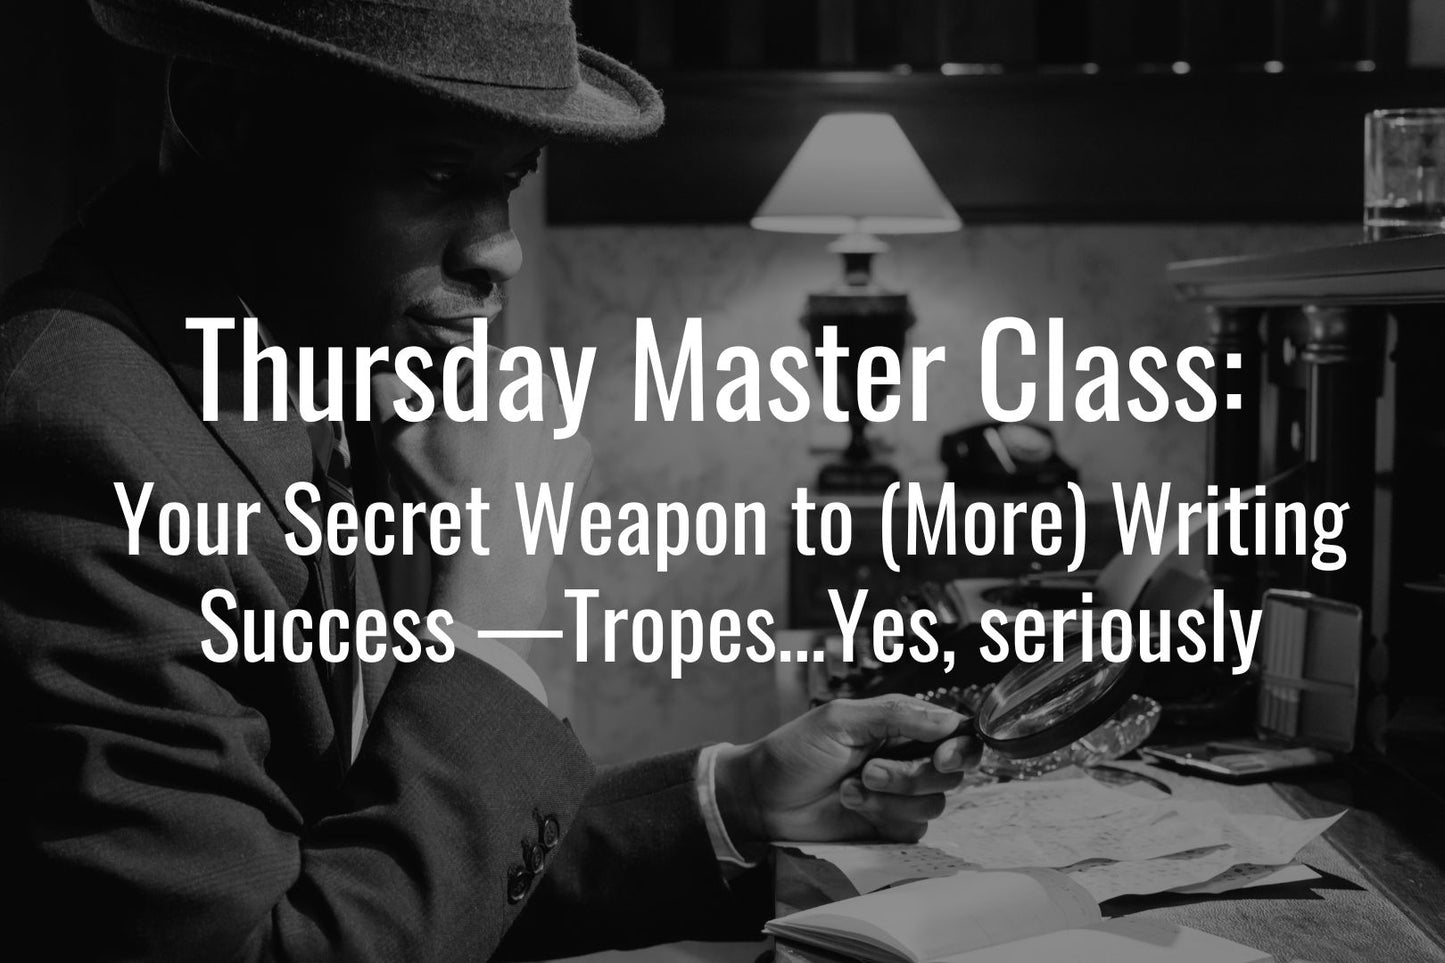 Thursday Master Class: Your Secret Weapon to (More) Writing Success —Tropes…Yes, seriously